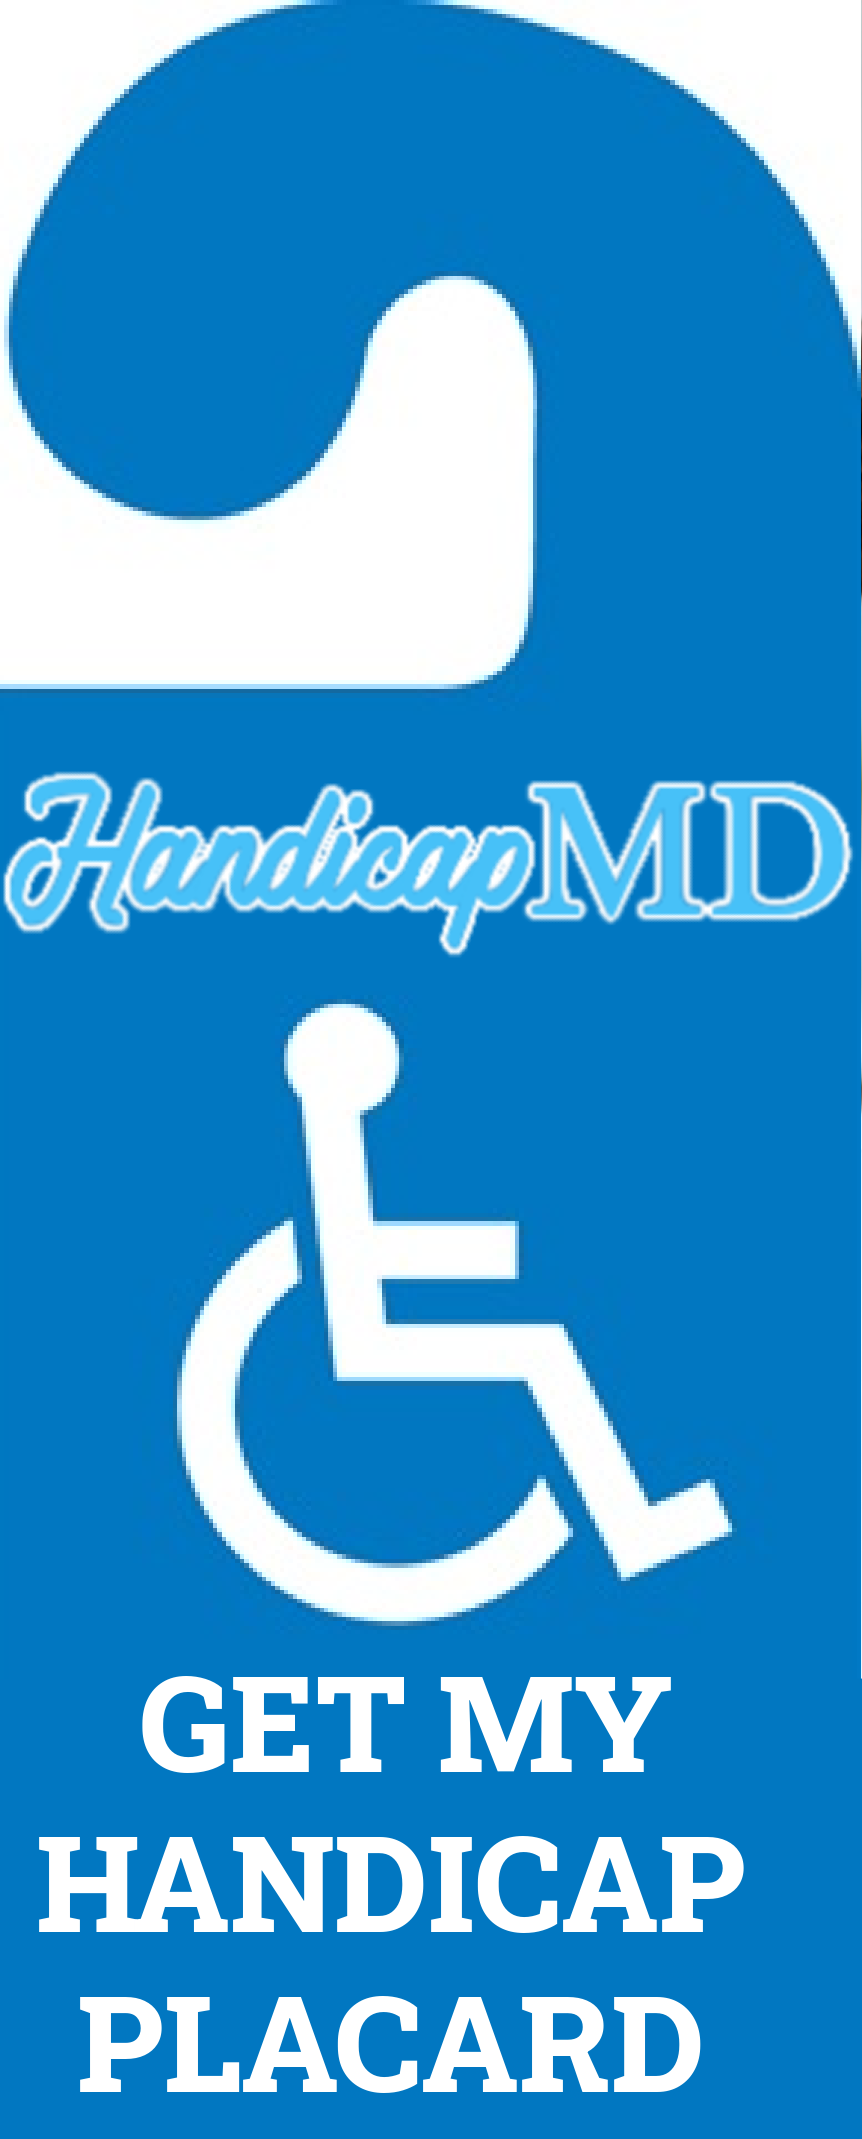 The Impact of Handicap Placard Abuse and How to Report it in Rhode Island